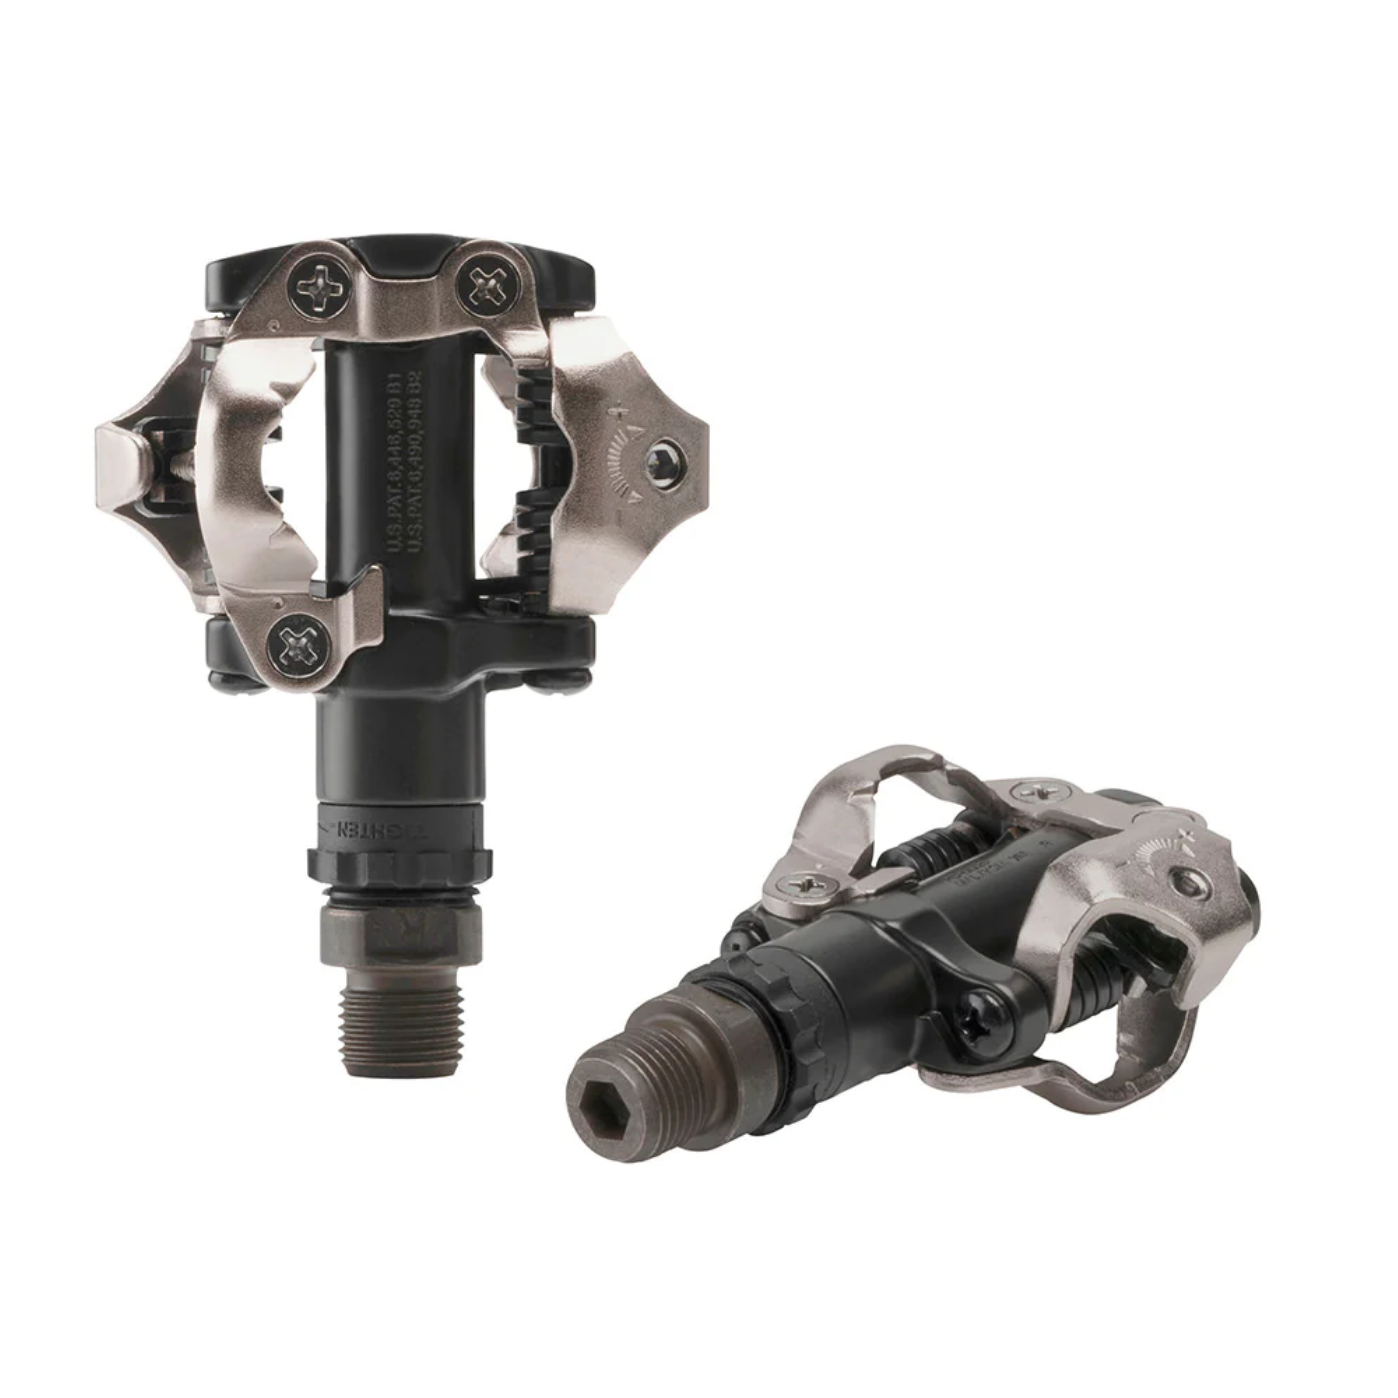 SHIMANO Pedals PD-M540 SPD